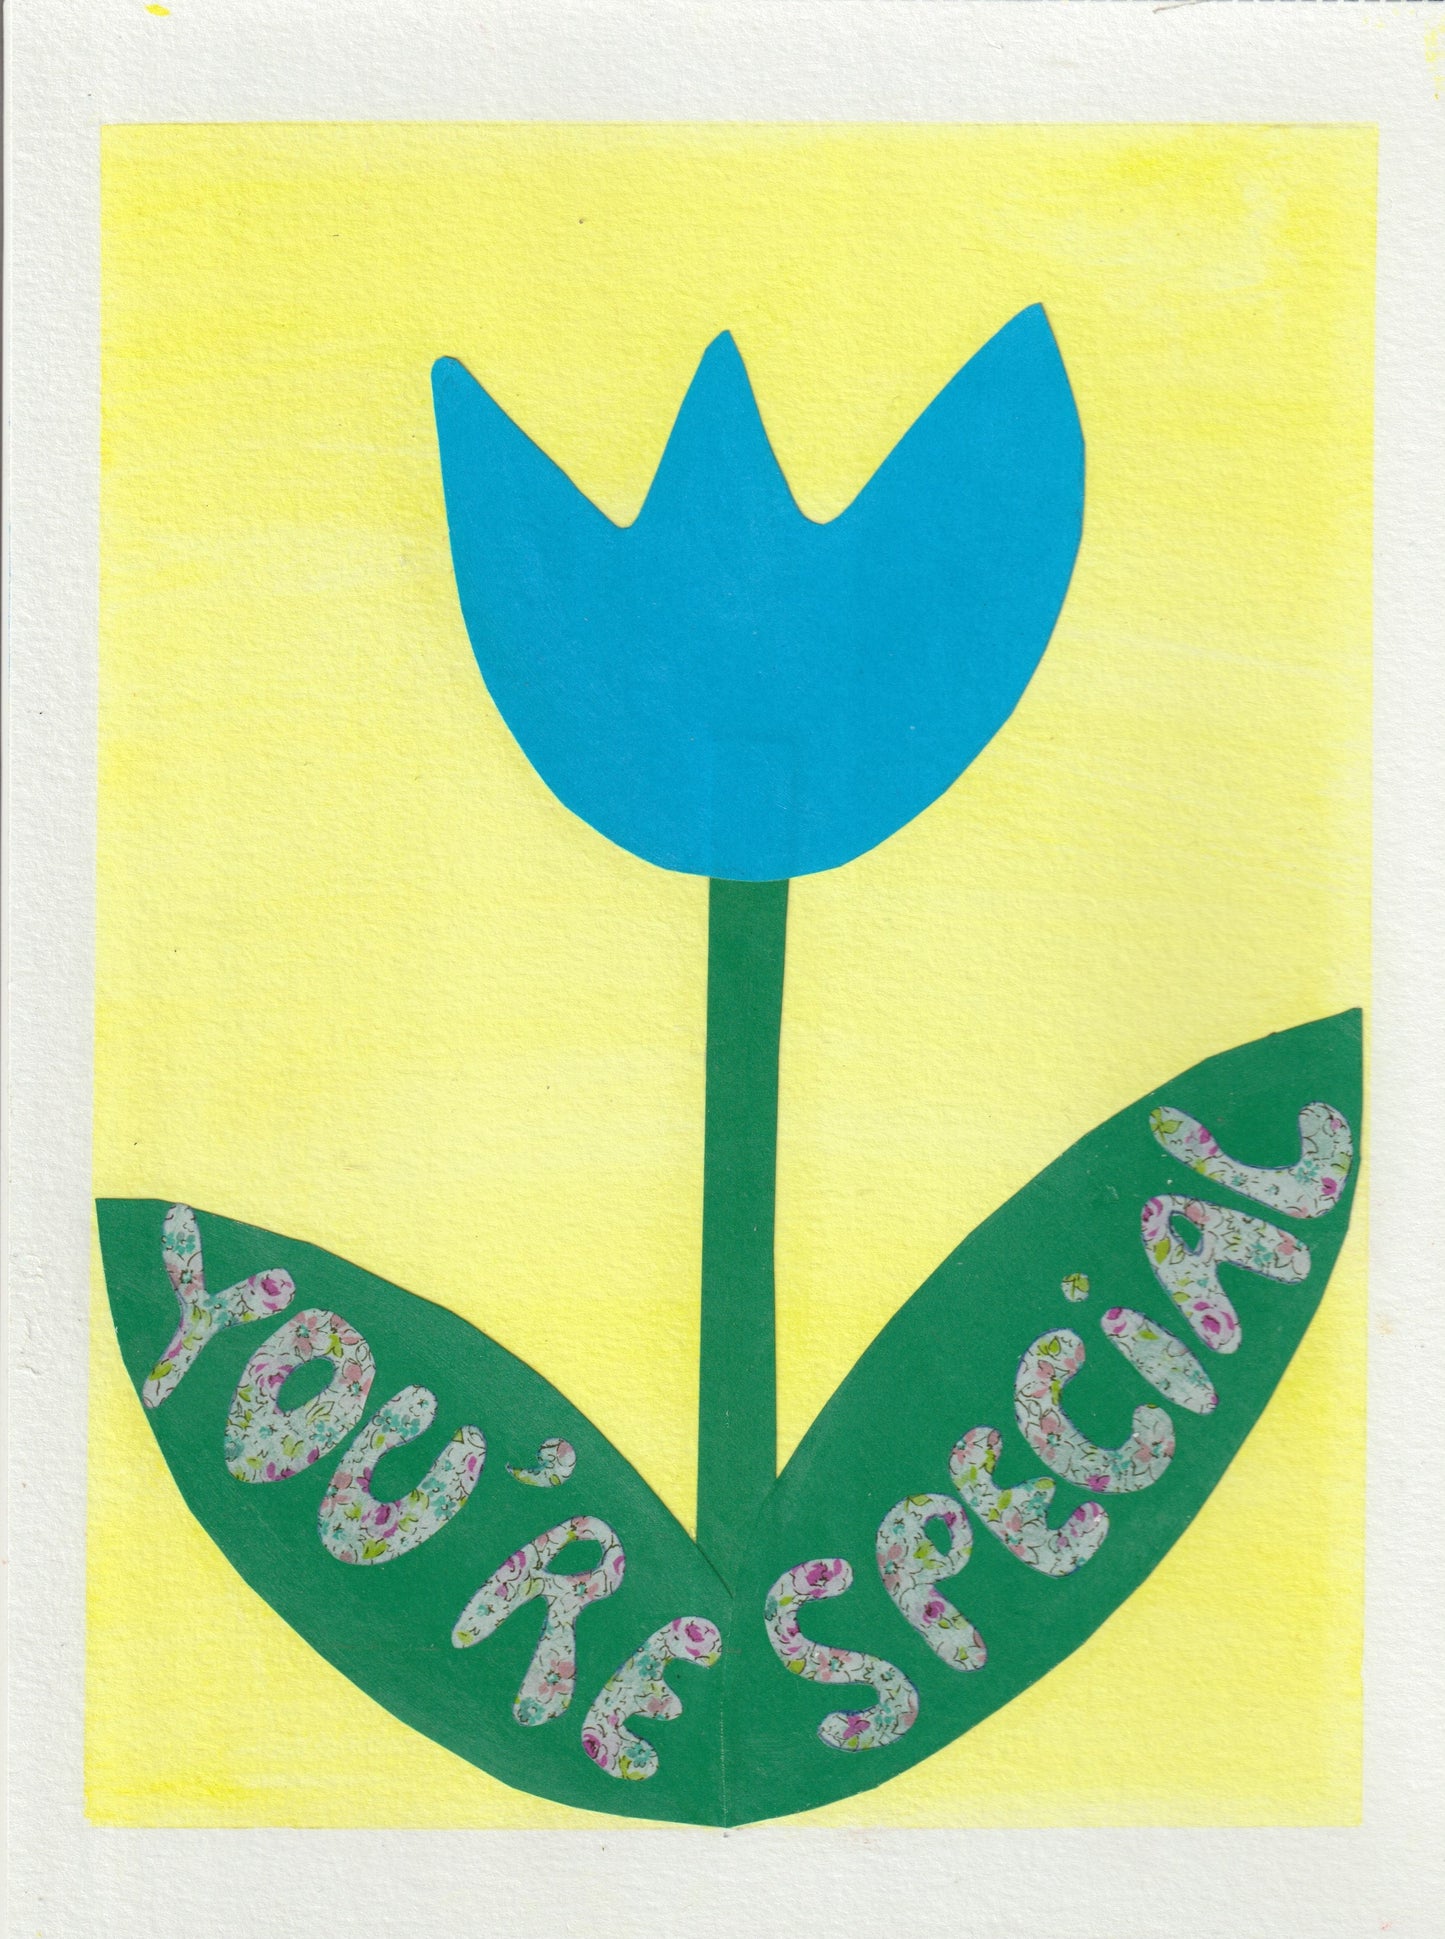 A collage of a blue tulip with the words you're special written on its green leaves